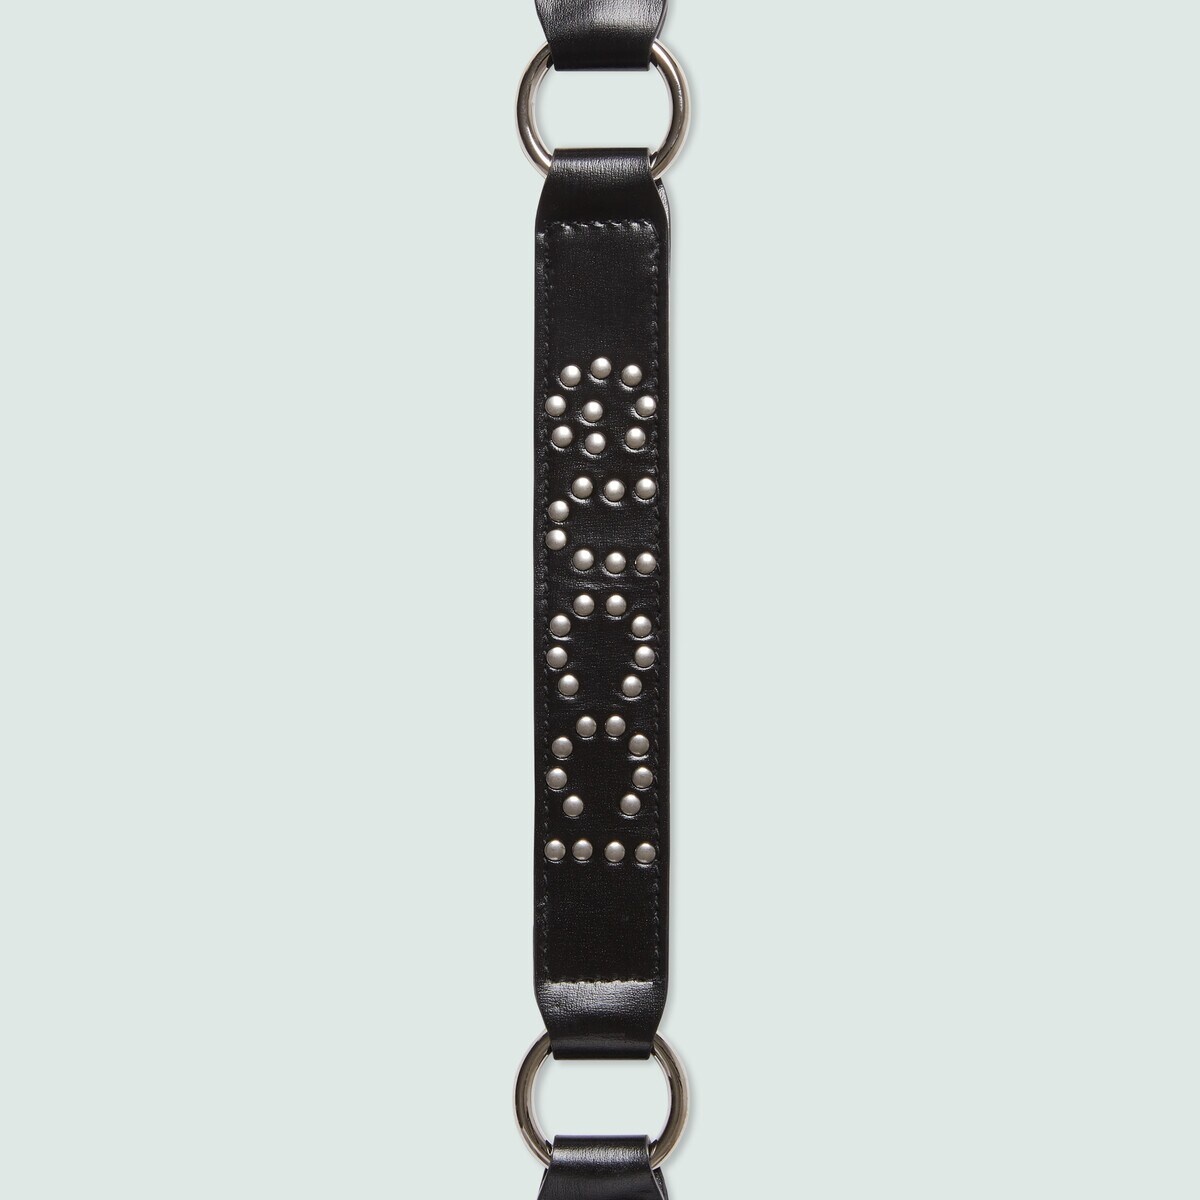 Thin studded 'Gucci' shoulder strap - 5